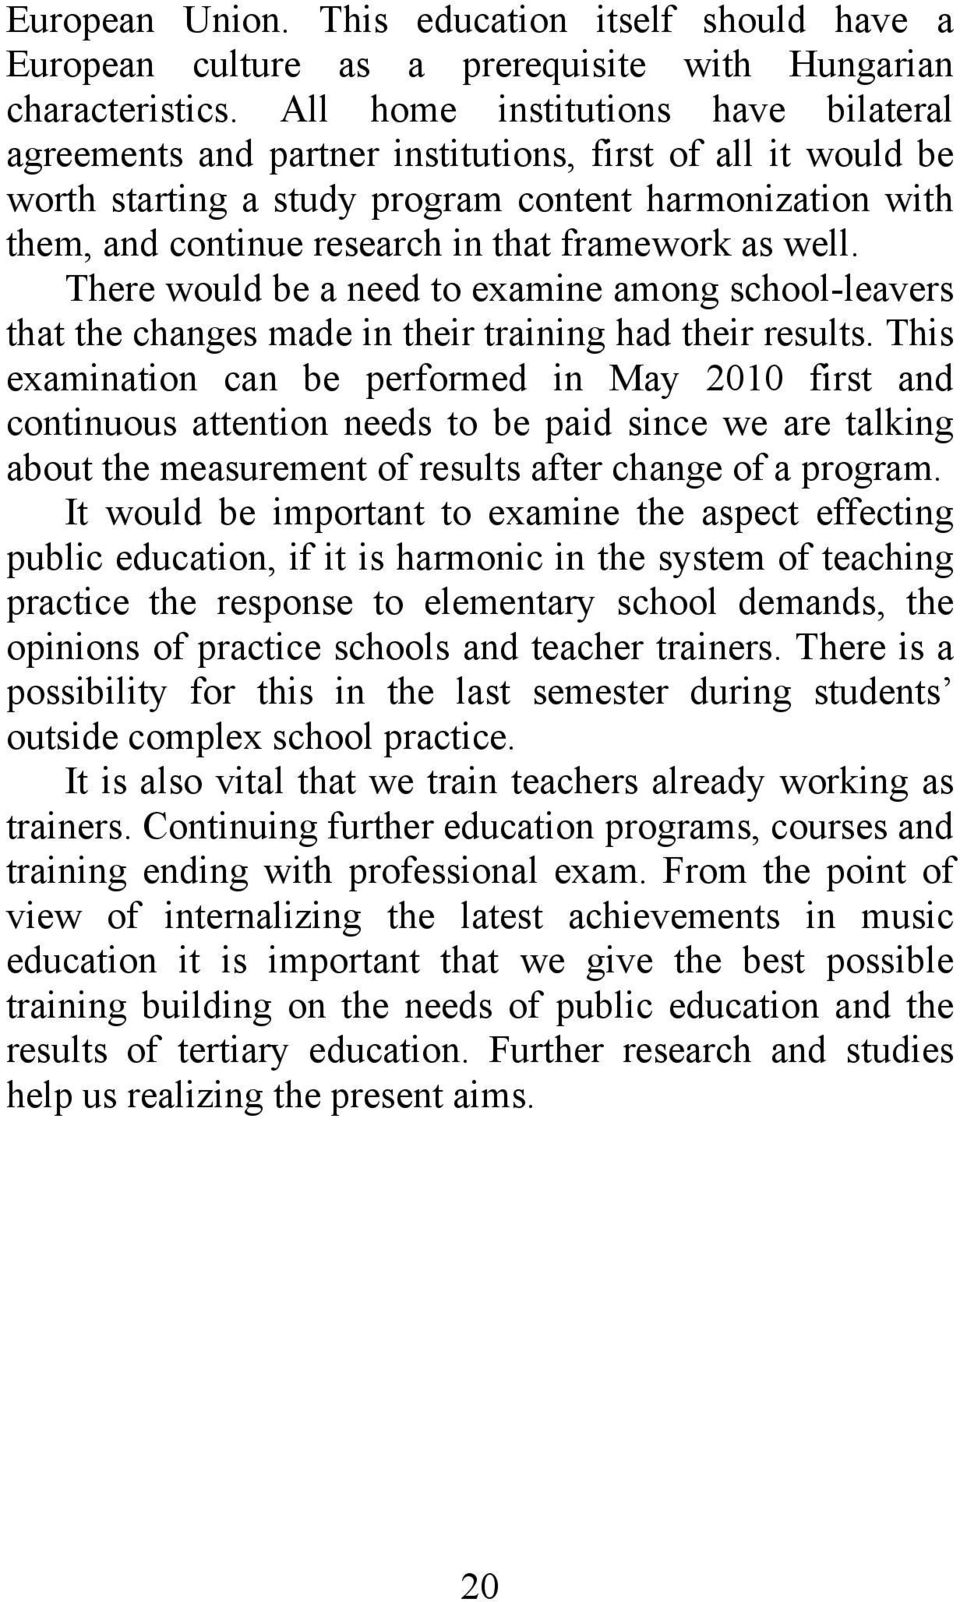 framework as well. There would be a need to examine among school-leavers that the changes made in their training had their results.